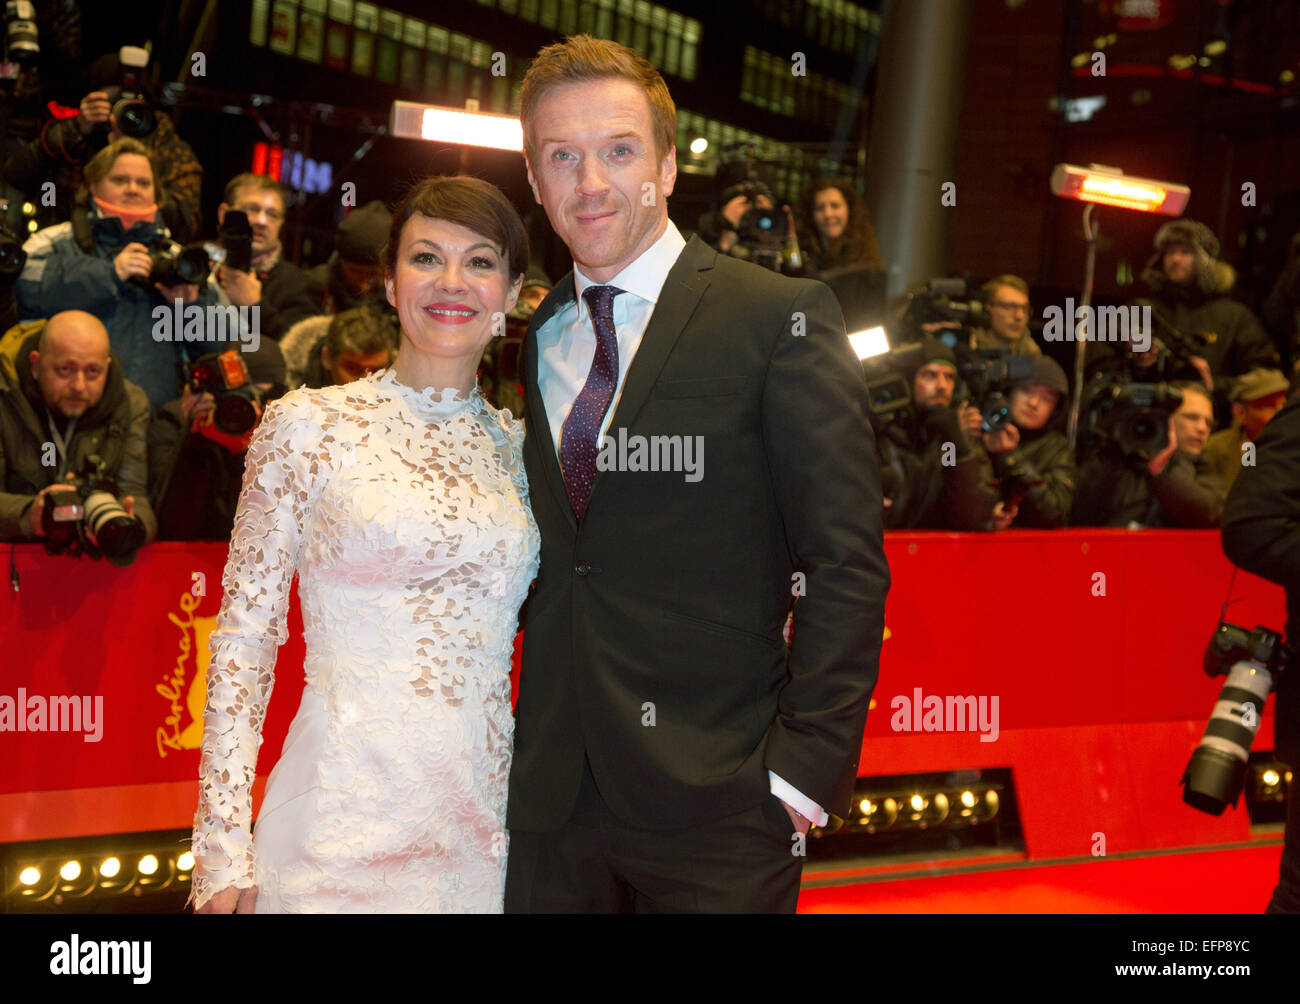 British actor Damian Lewis and his wife Helen McCrory attend the premiere of the movie 'Queen Of The Desert' during the 65th International Berlin Film Festival, Berlinale, in Berlin, Germany, on 06 February 2015. Photo: Hubert Boesl/dpa /dpa - NO WIRE SERVICE - Stock Photo